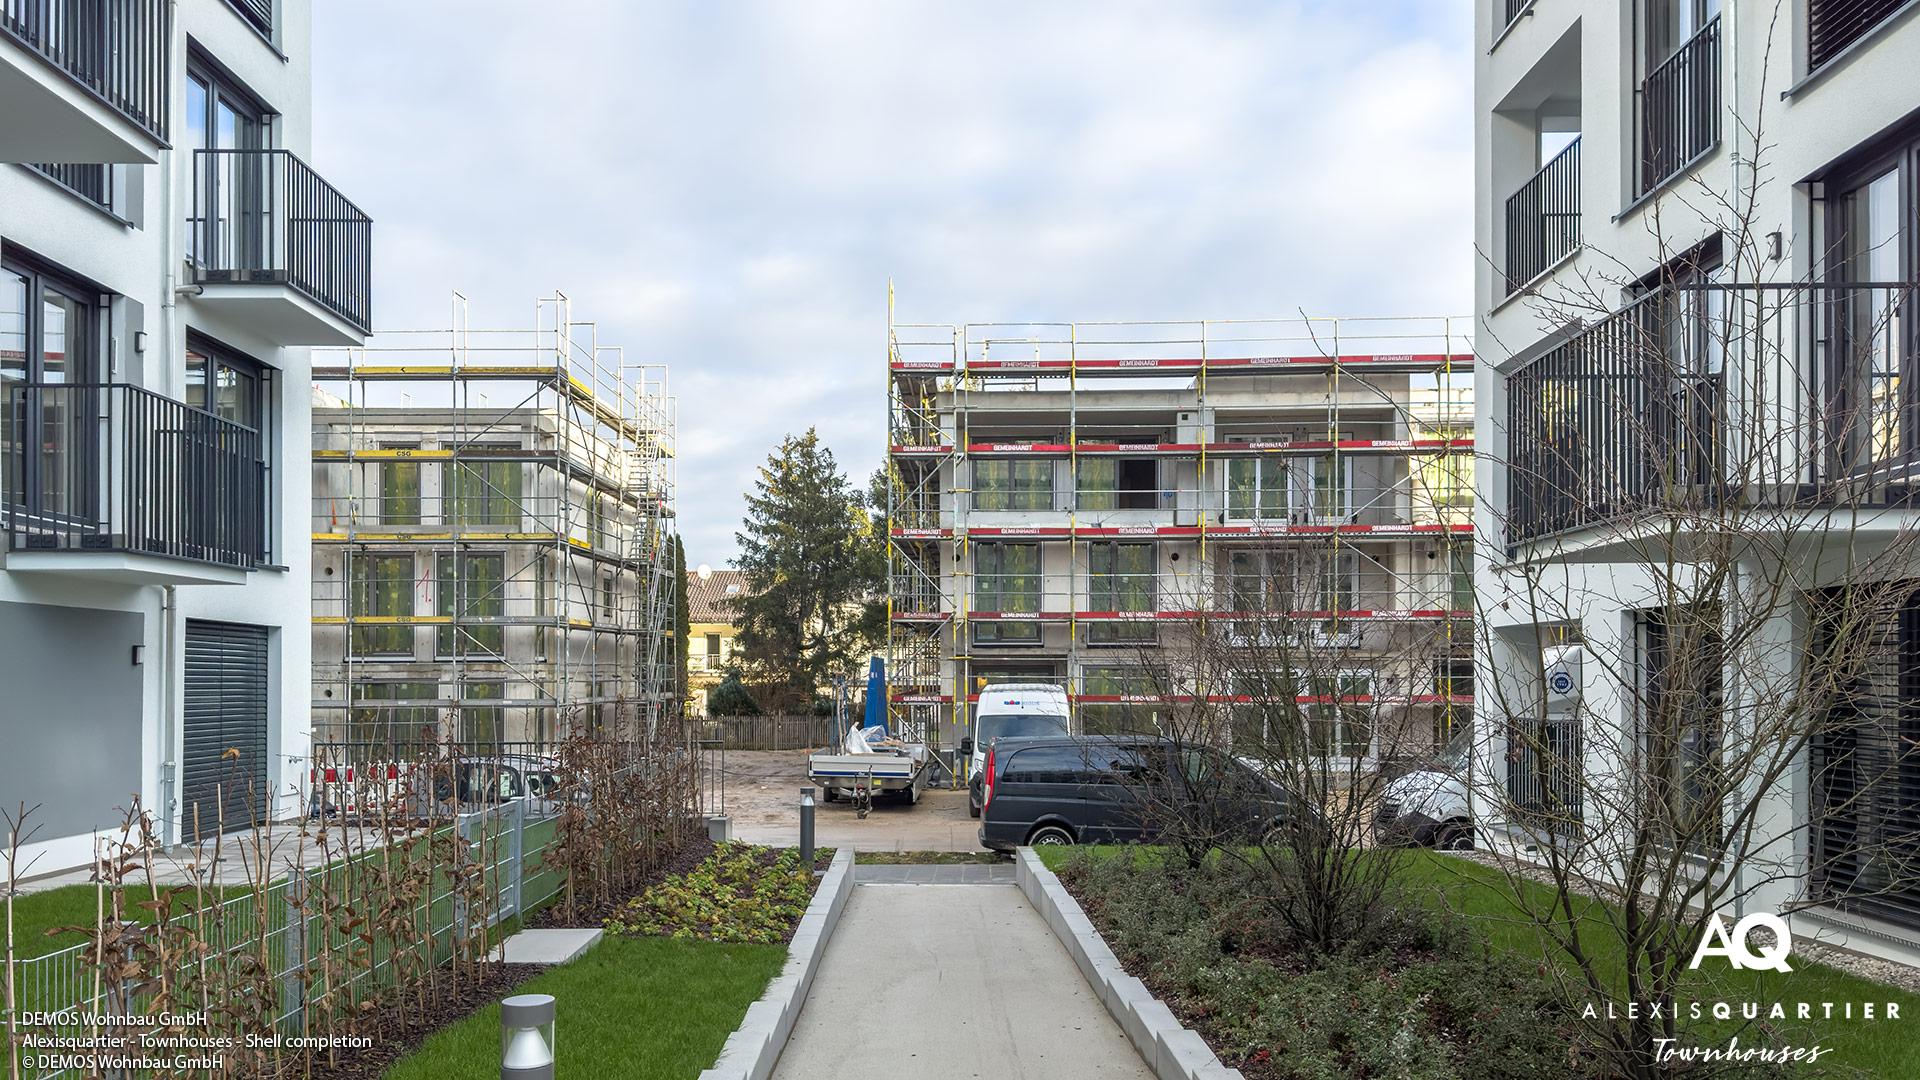 'Alexisquartier - Townhouses' in Munich-Perlach: The shell is finished!